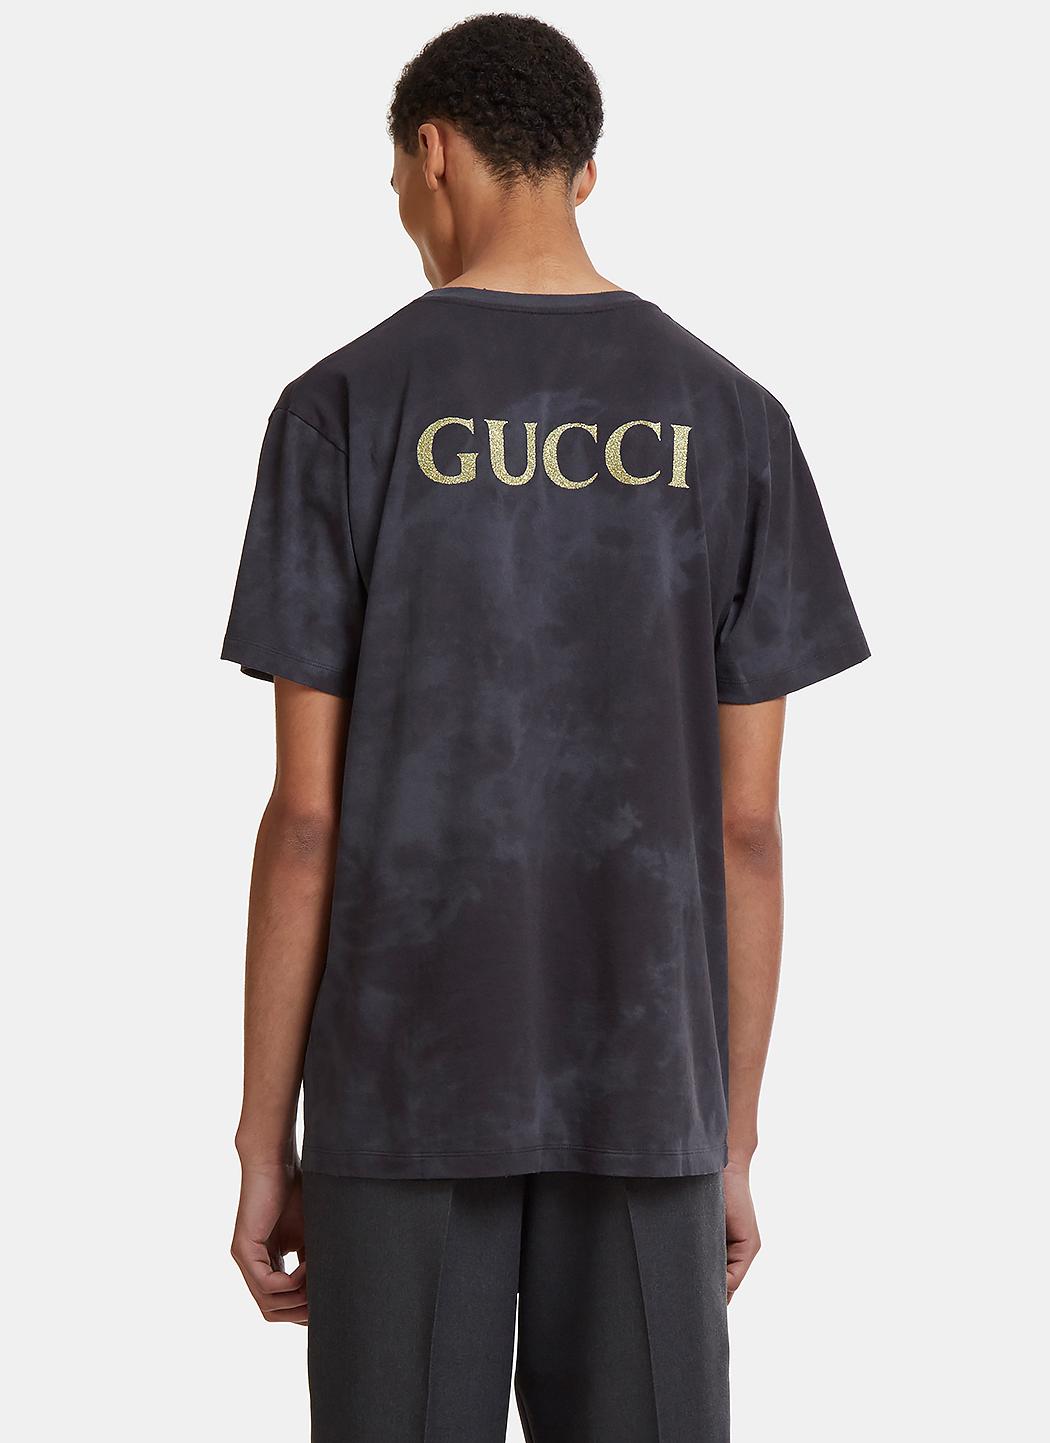 Gucci Cotton Glitter Logo Acdc T-shirt In Grey in Gray for Men - Lyst